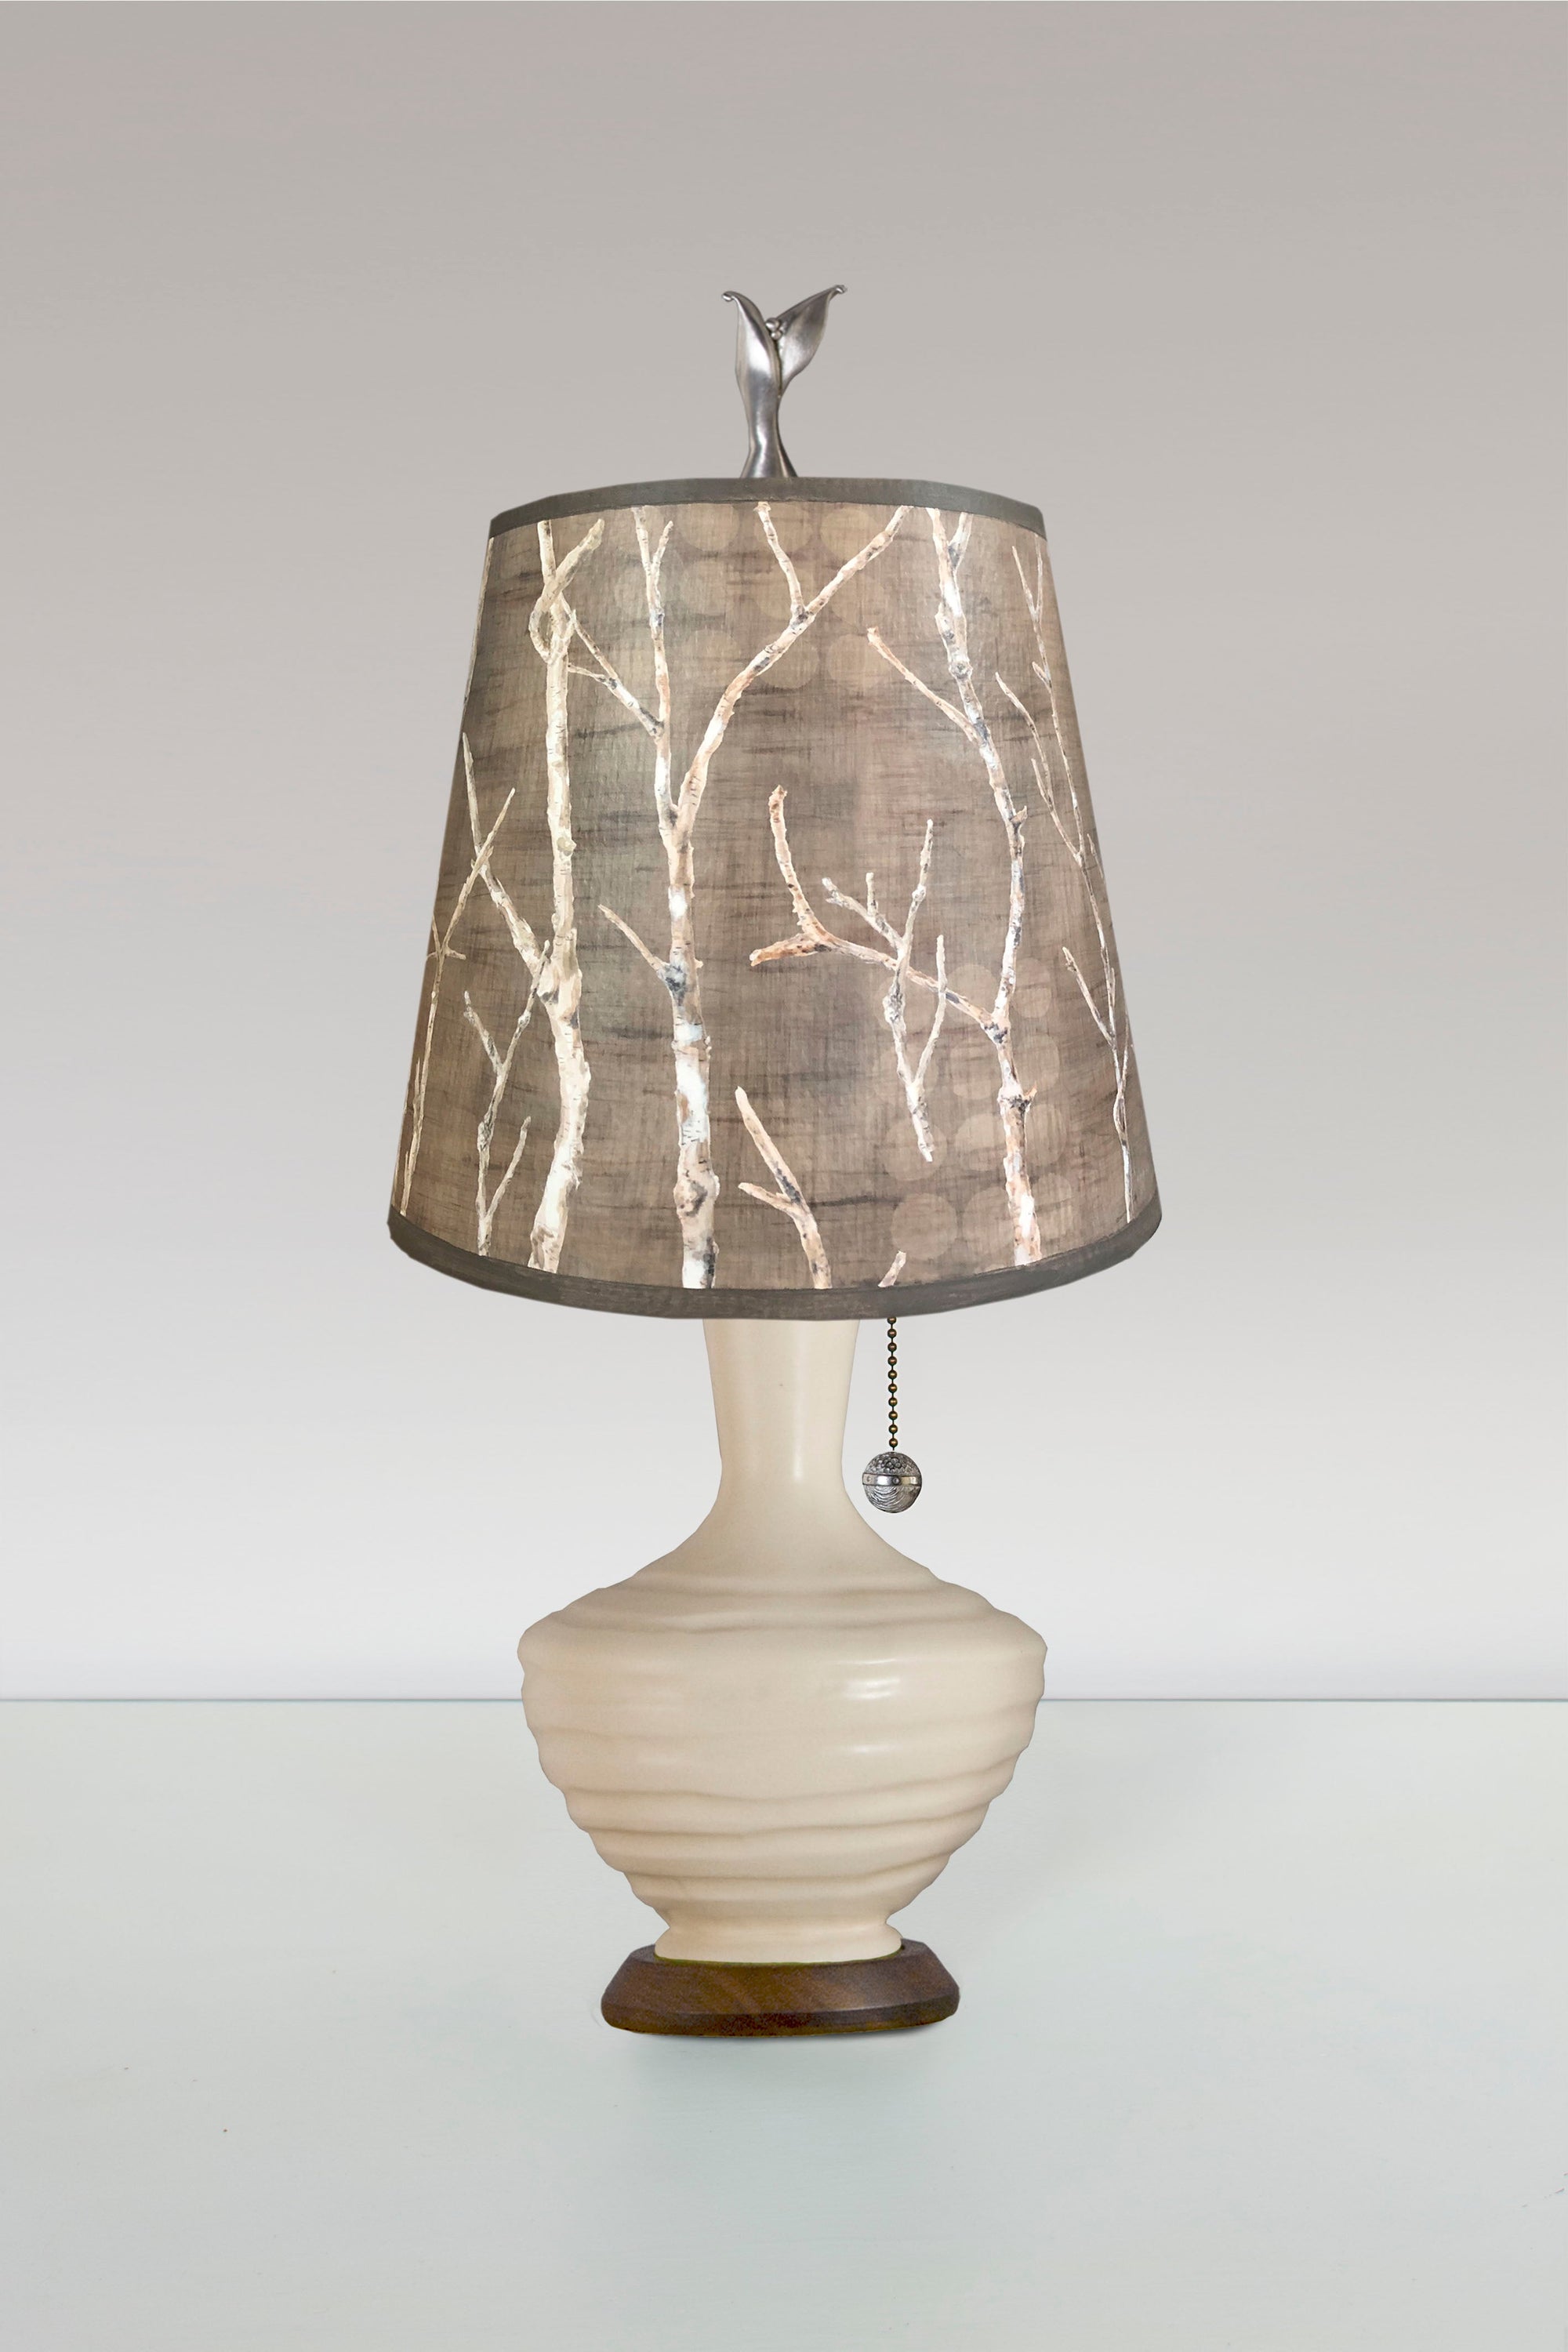 Janna Ugone & Co Table Lamps Ceramic Table Lamp in Ivory Glaze with Small Drum Shade in Twigs